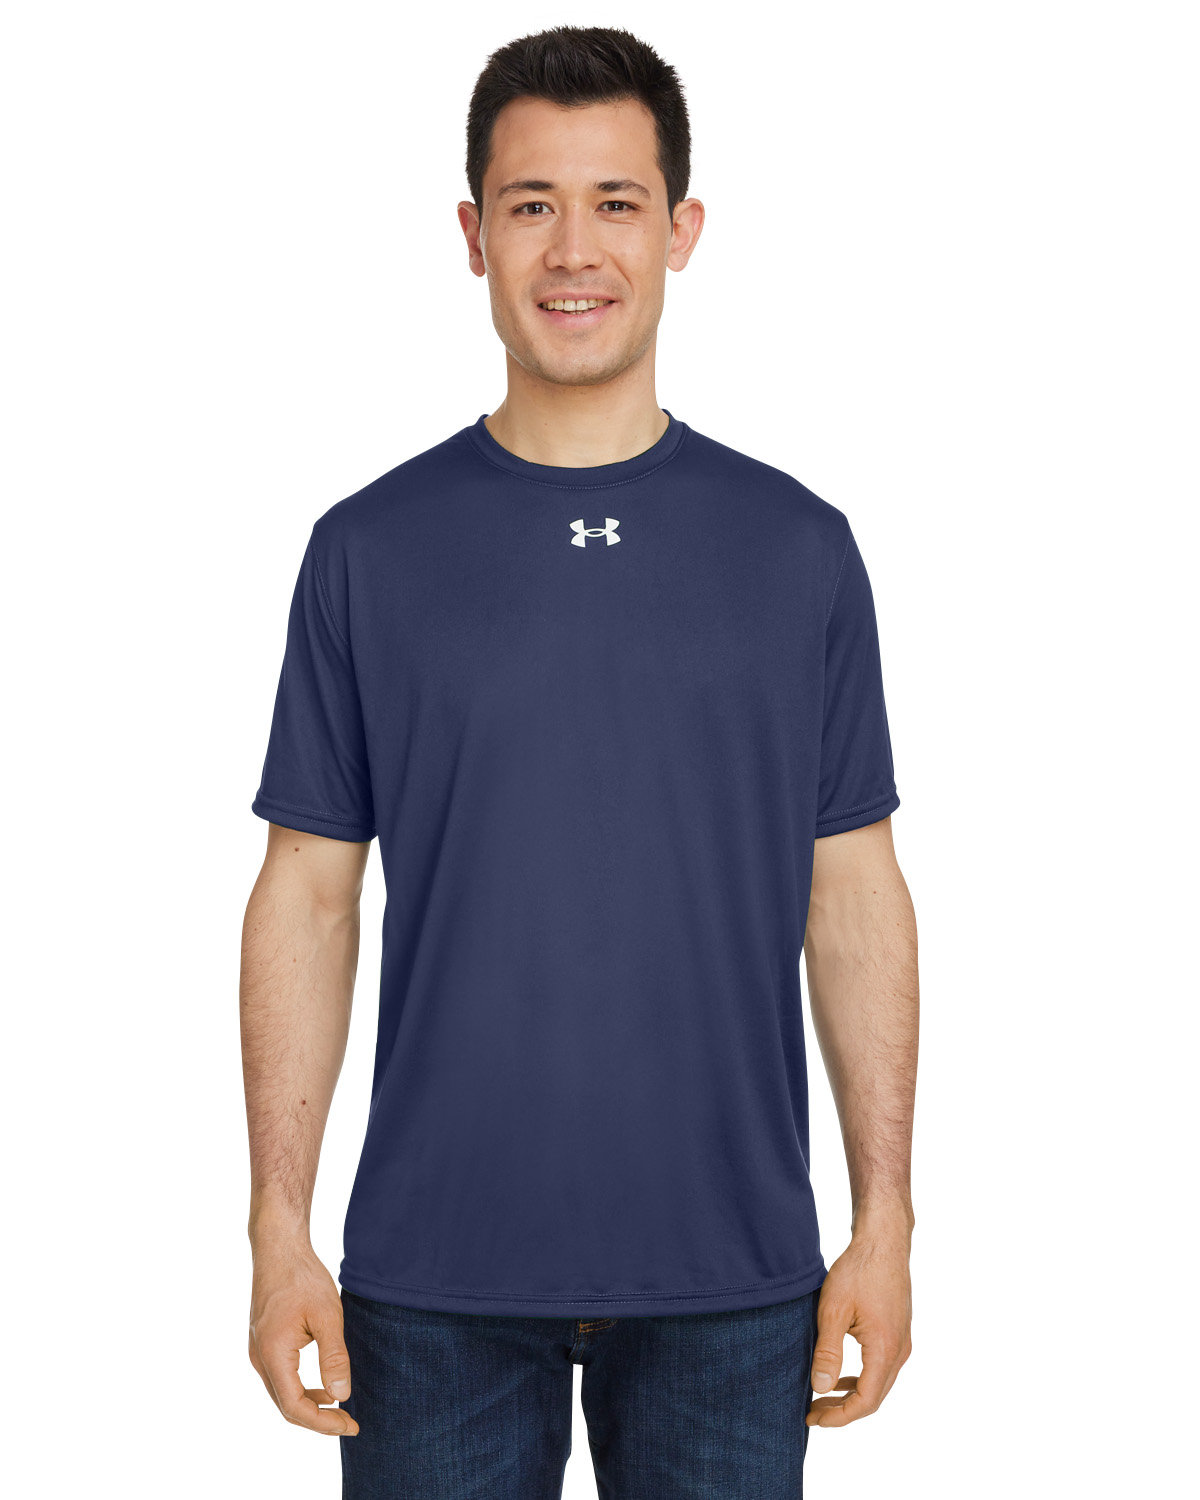 Under Armour Men's and Big Men's UA Tech Half Zip Pullover with Long  Sleeves, Sizes up to 2XL 